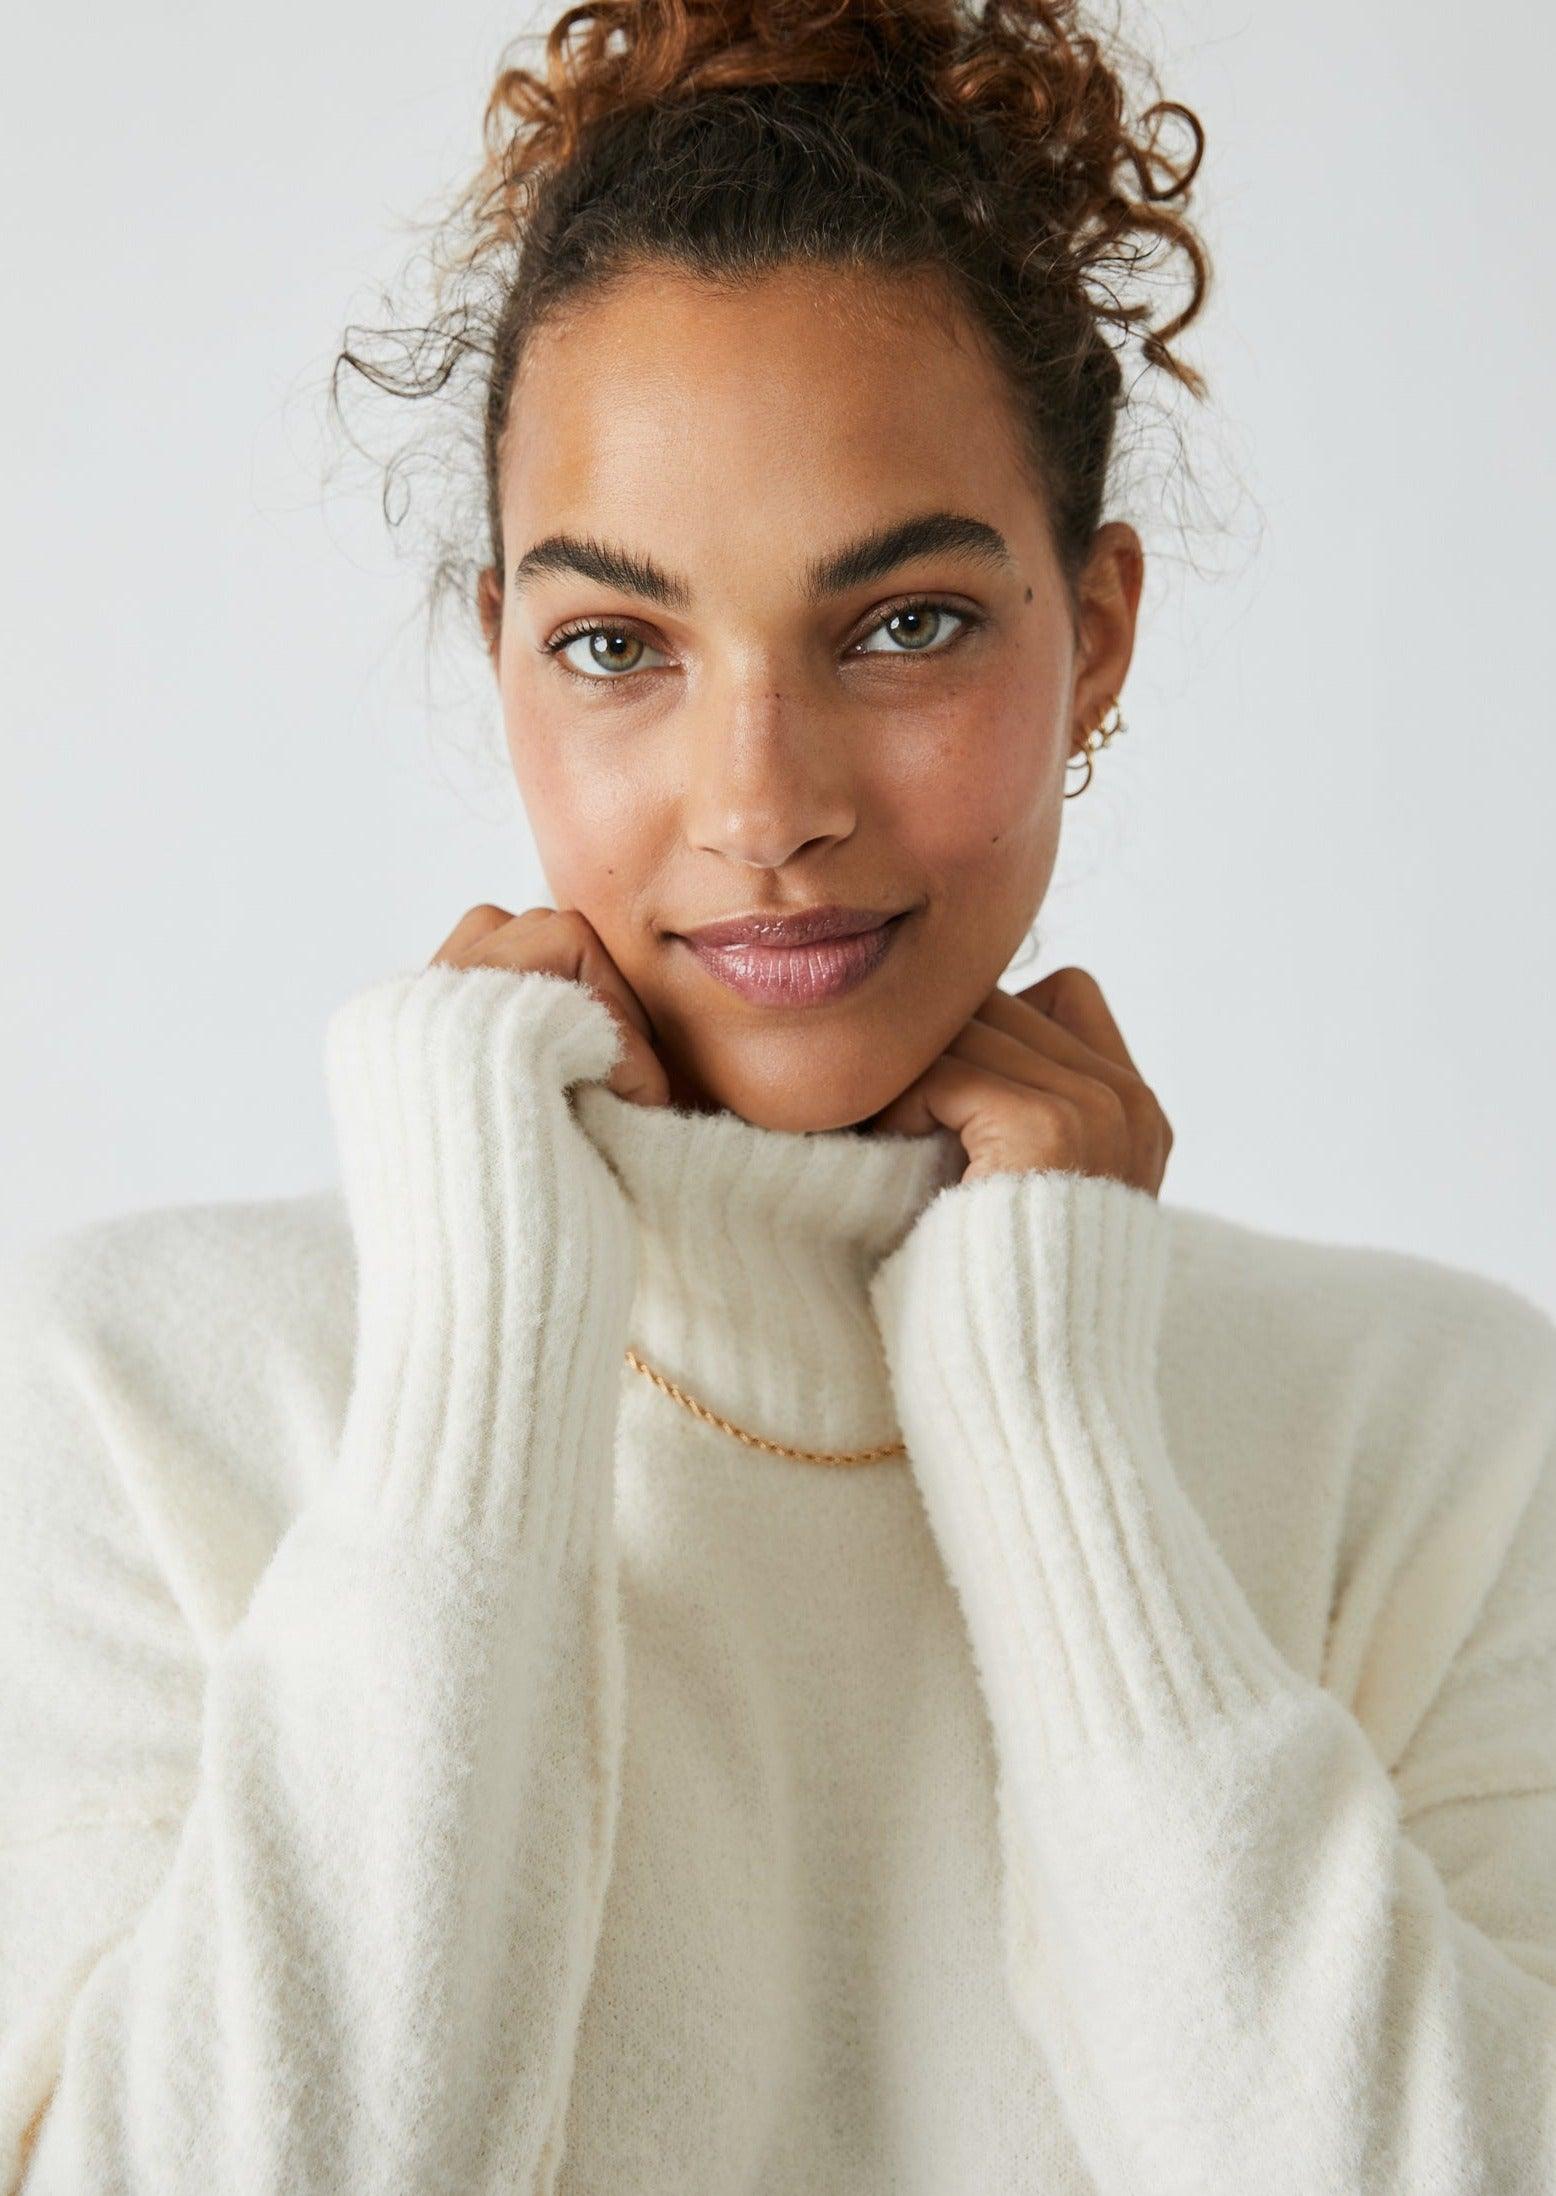 Free People - Vancouver Turtleneck in Ivory - OutDazl